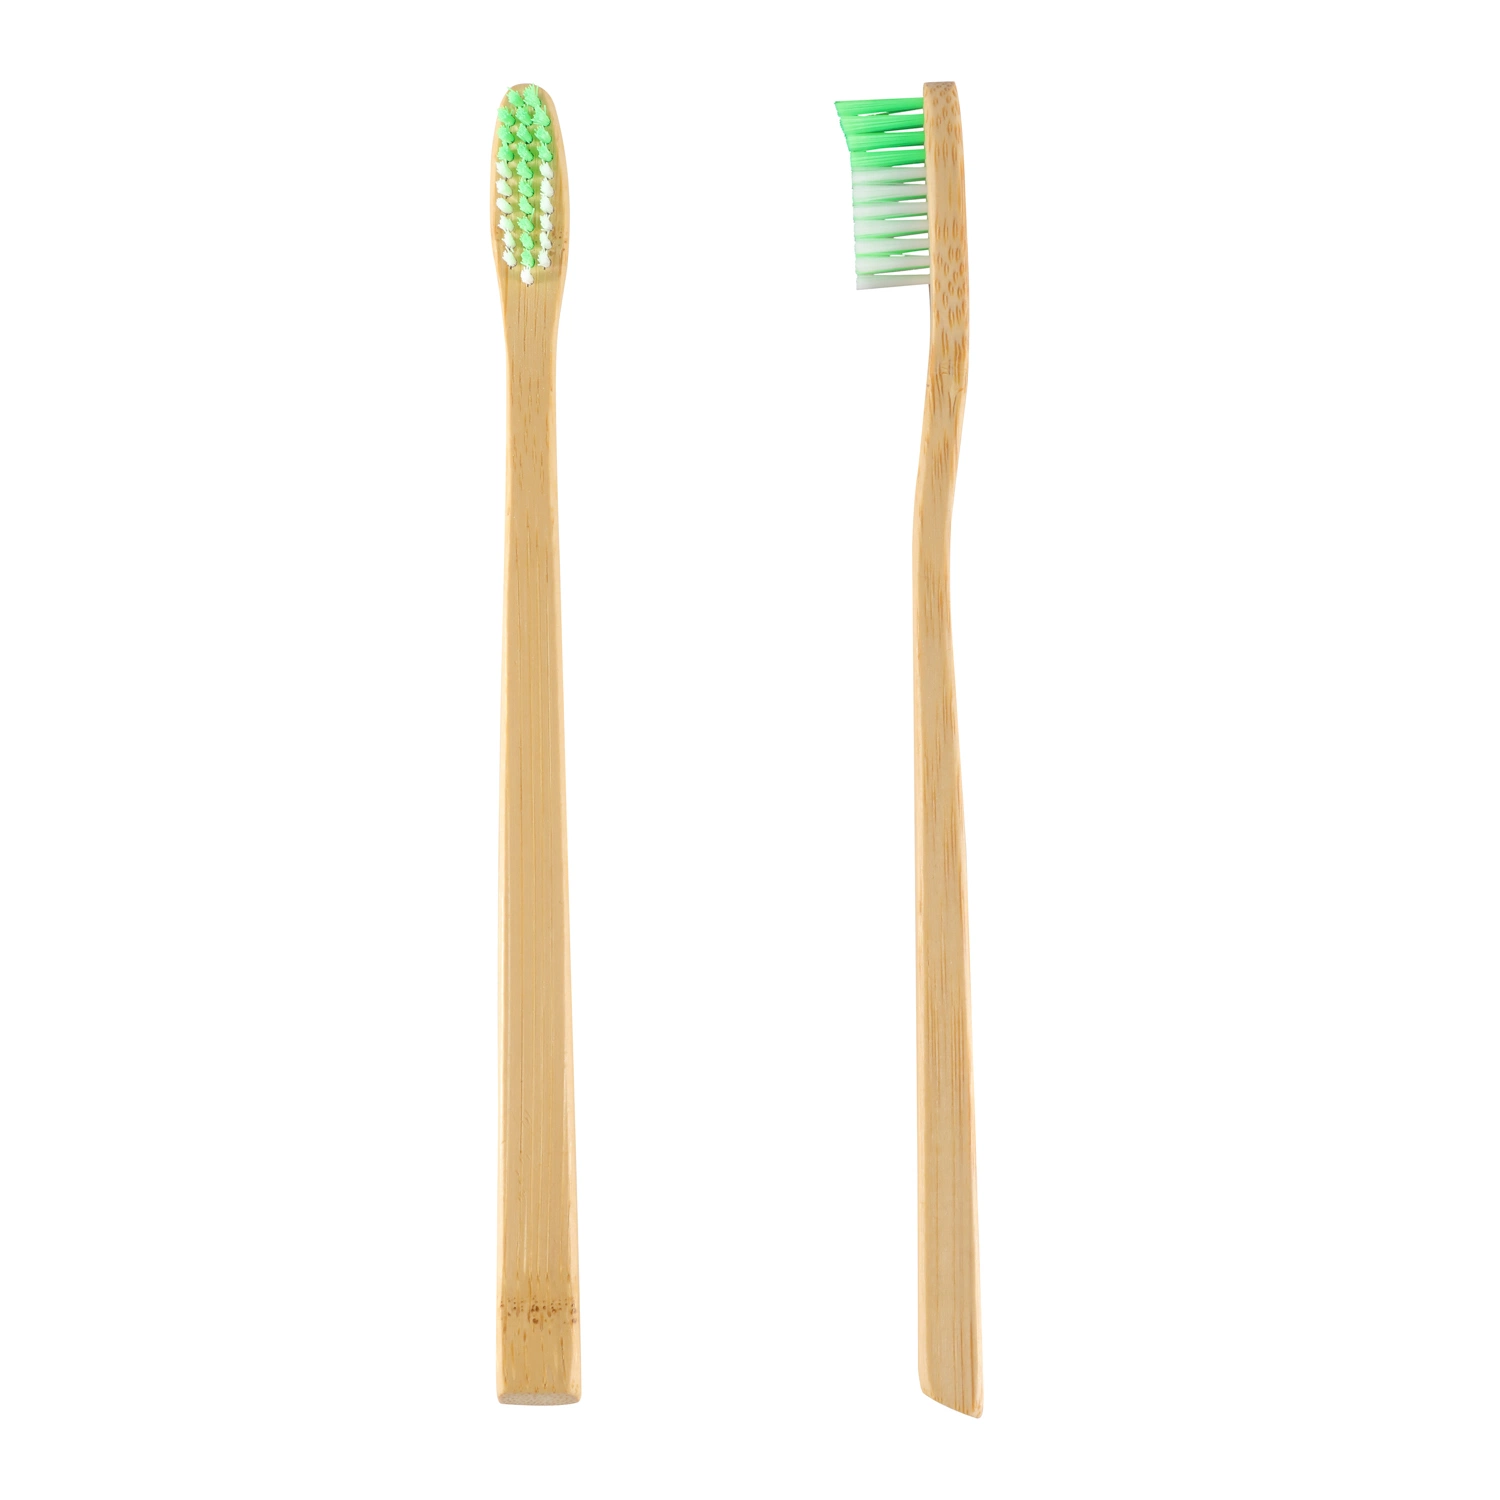 Popular Sales Round-Edged Flat Bamboo Toothbrush Adult Hotel Disposable Supplies Environmental Bamboo Toothbrush